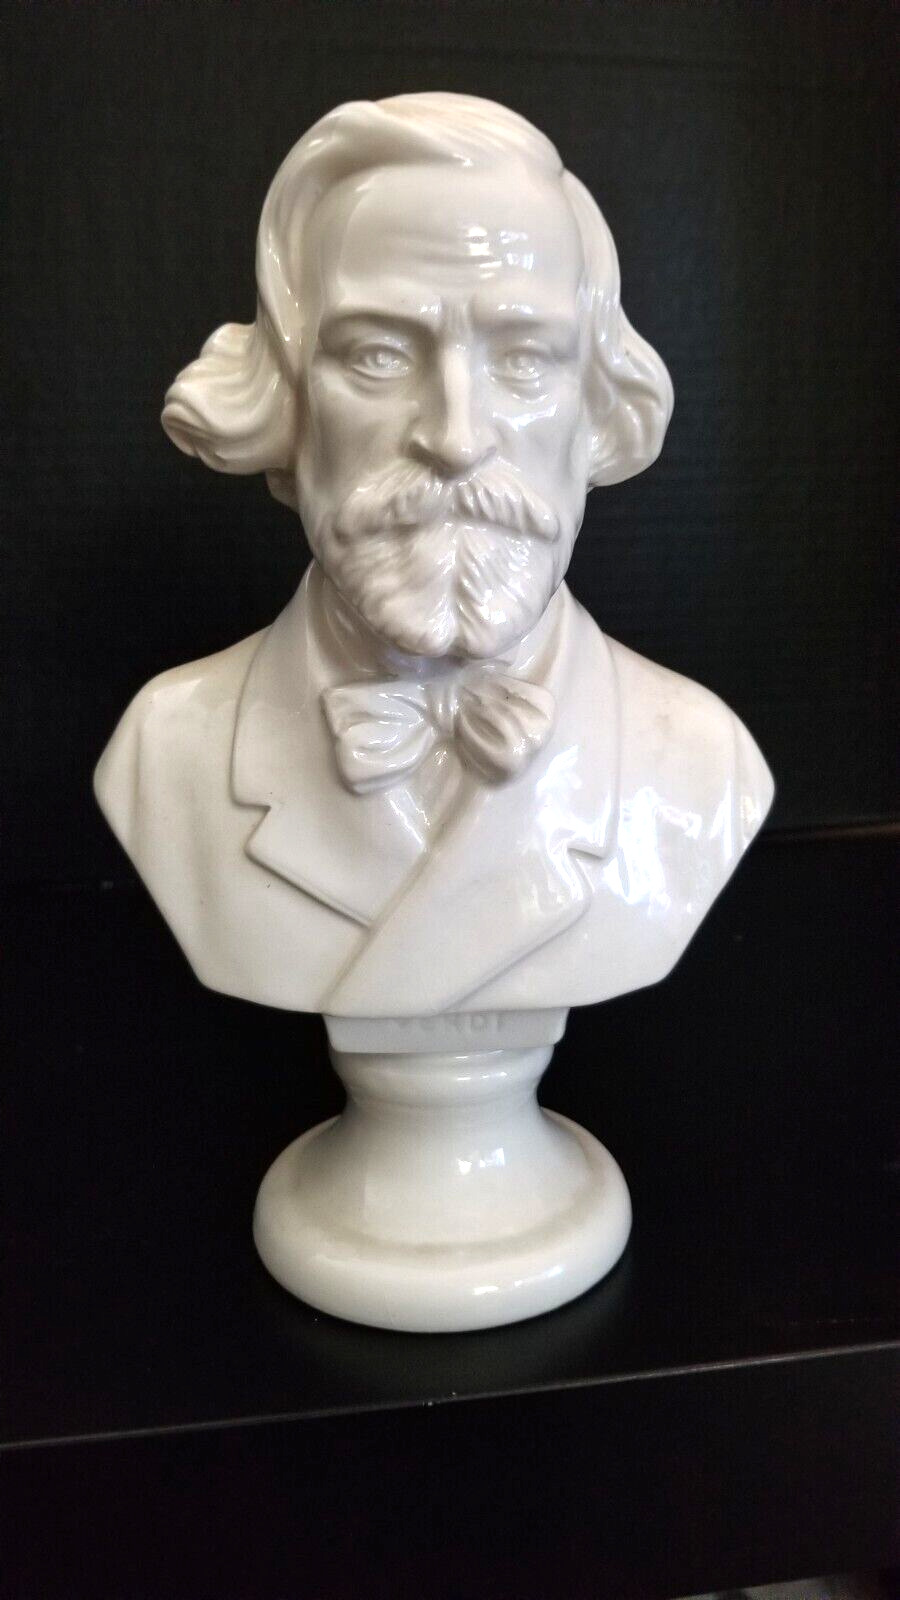 Bust of Giuseppe Verdi. Made in Italy. 9 inches Tall. Numbered.